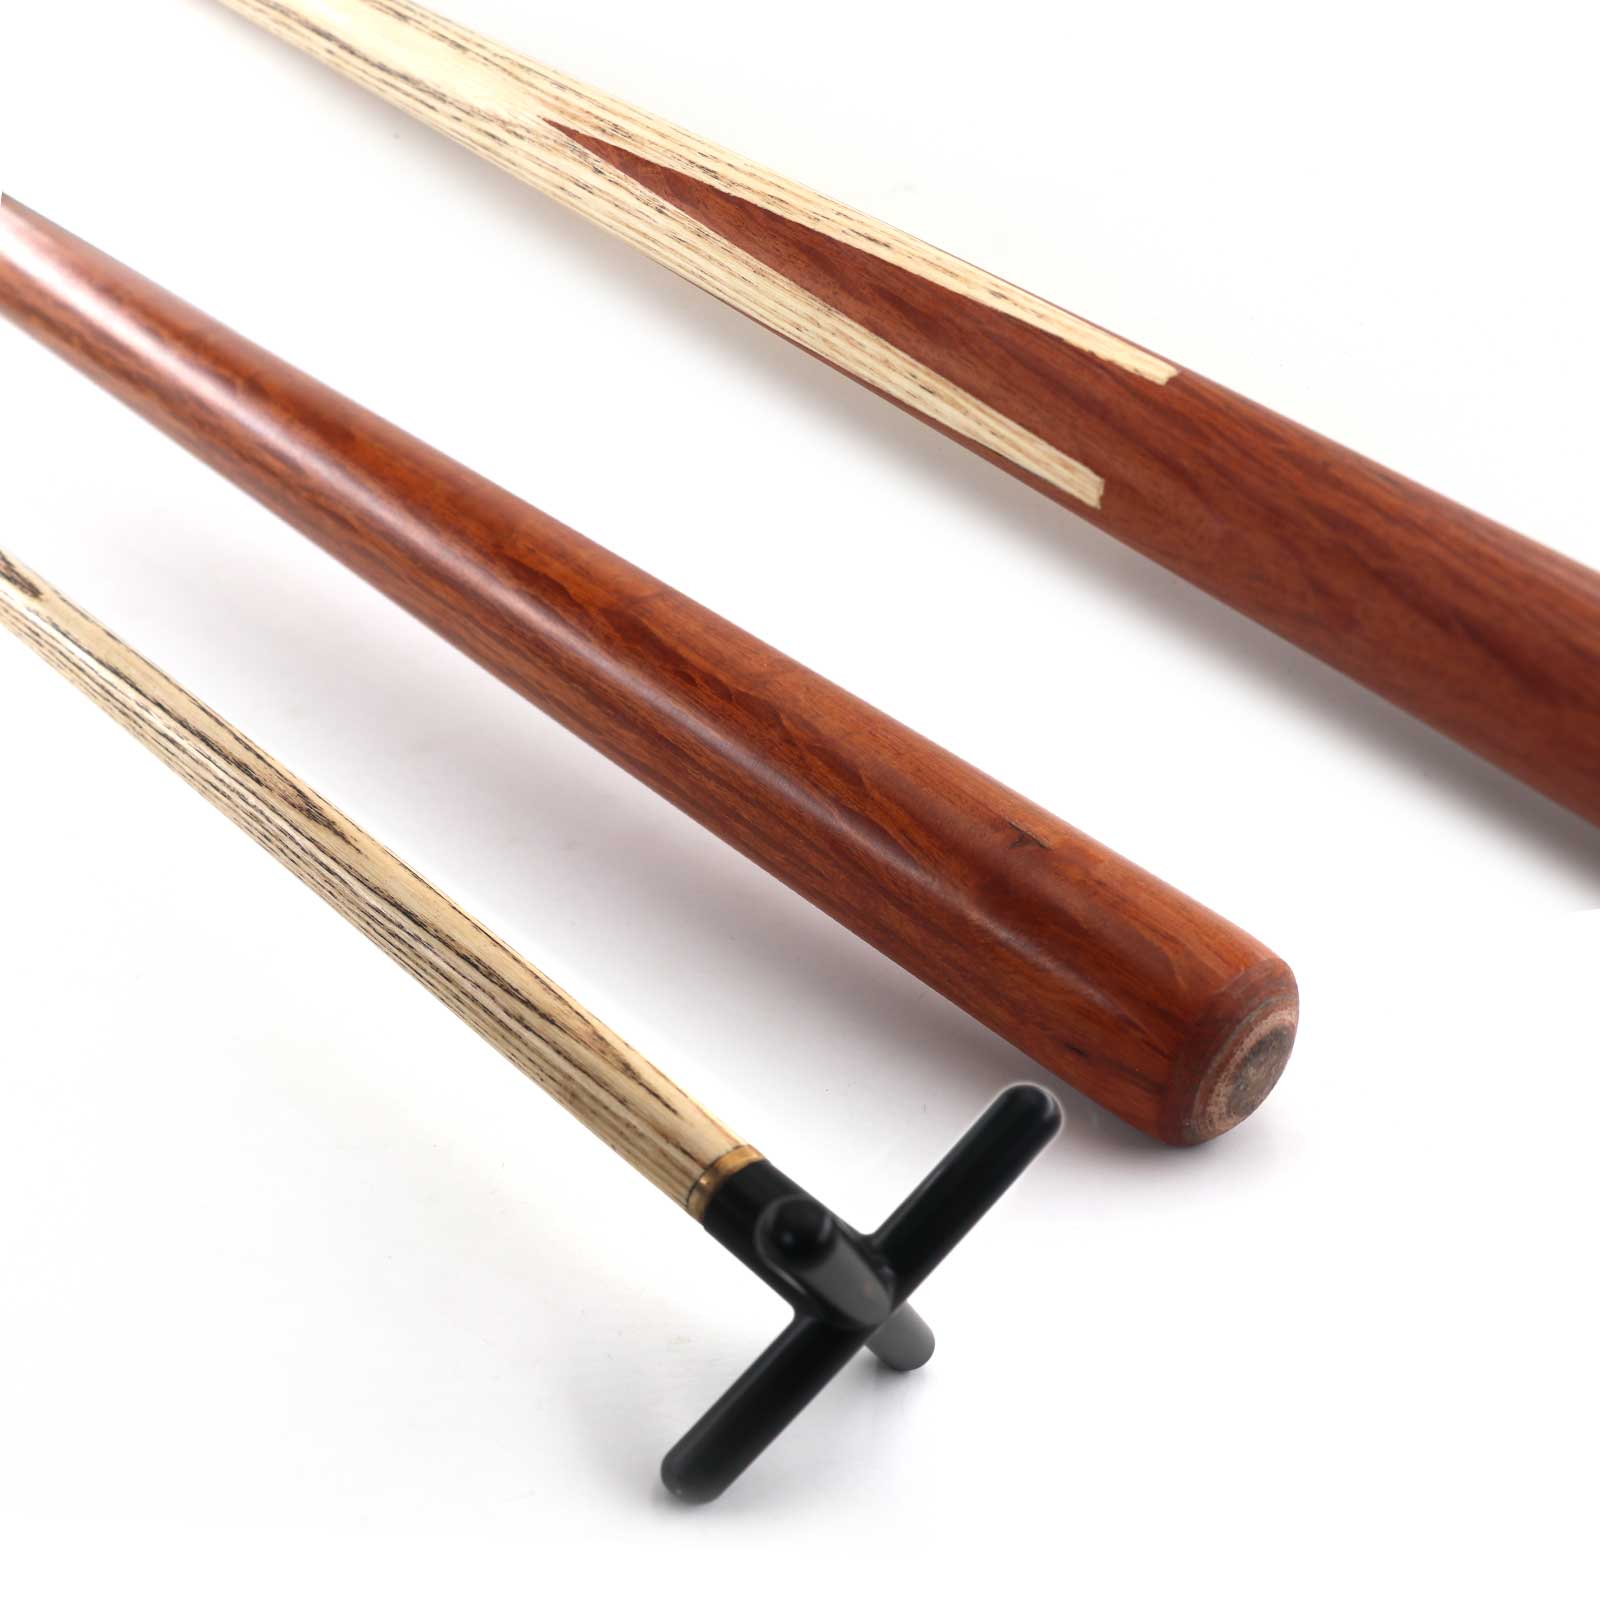 Walkabout Pool cue and rest value pack